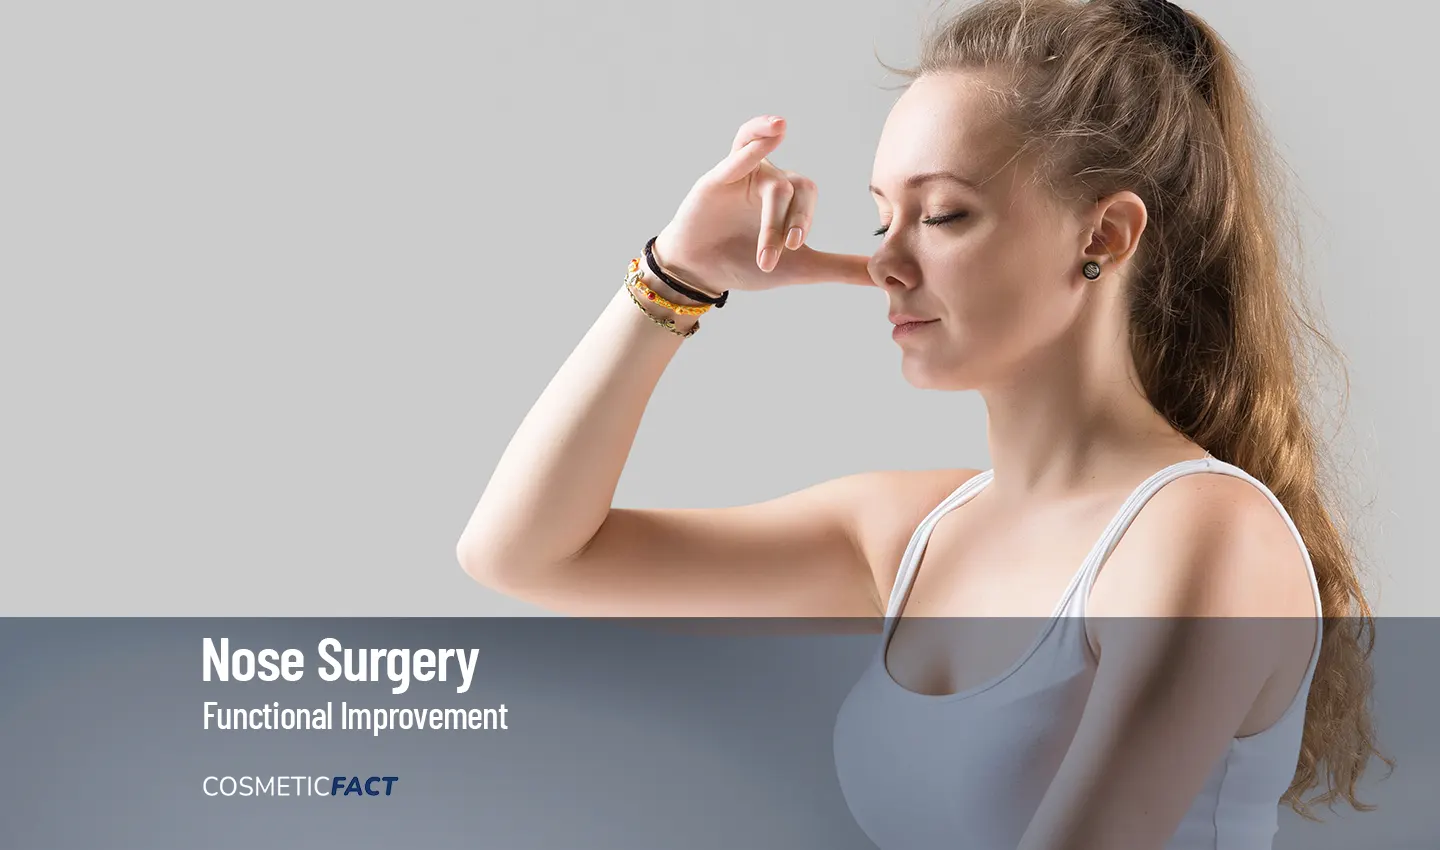 Woman touching her nose, representing the benefits of functional rhinoplasty for improving breathing function and alleviating sinus issues.